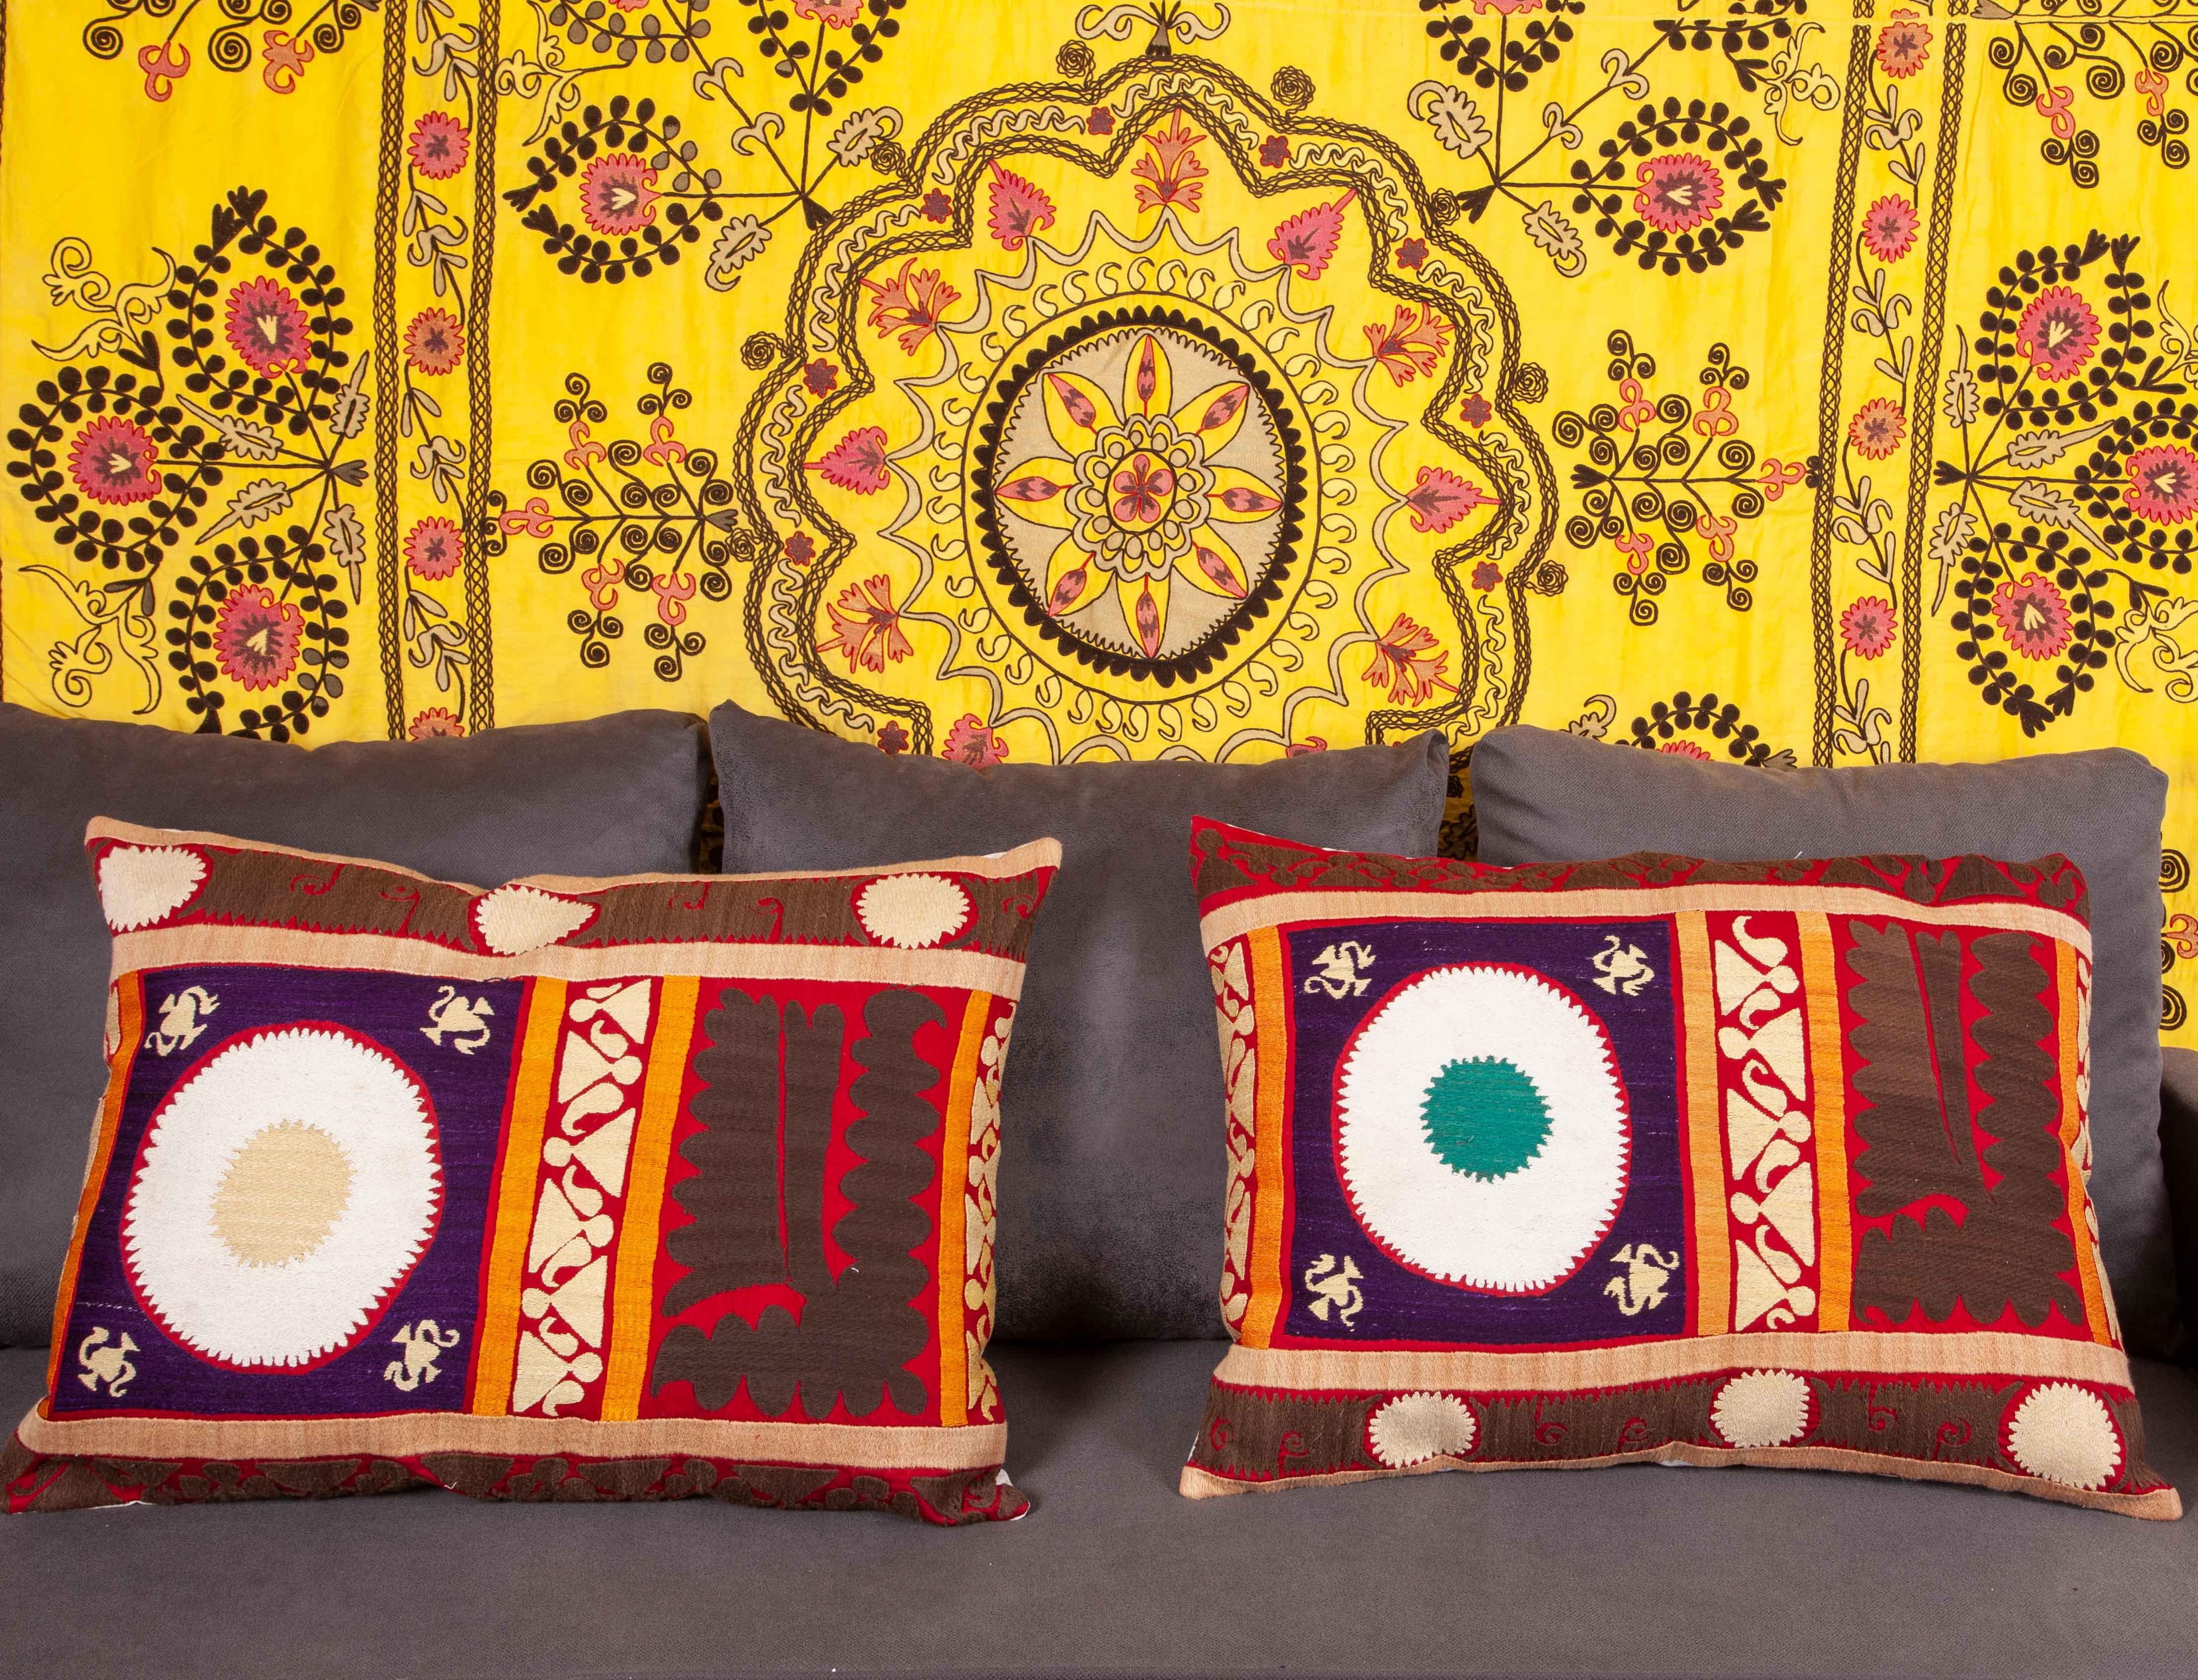 Cotton Vintage Suzani Pillow Cases, Cushion Covers, Mid-20th Century